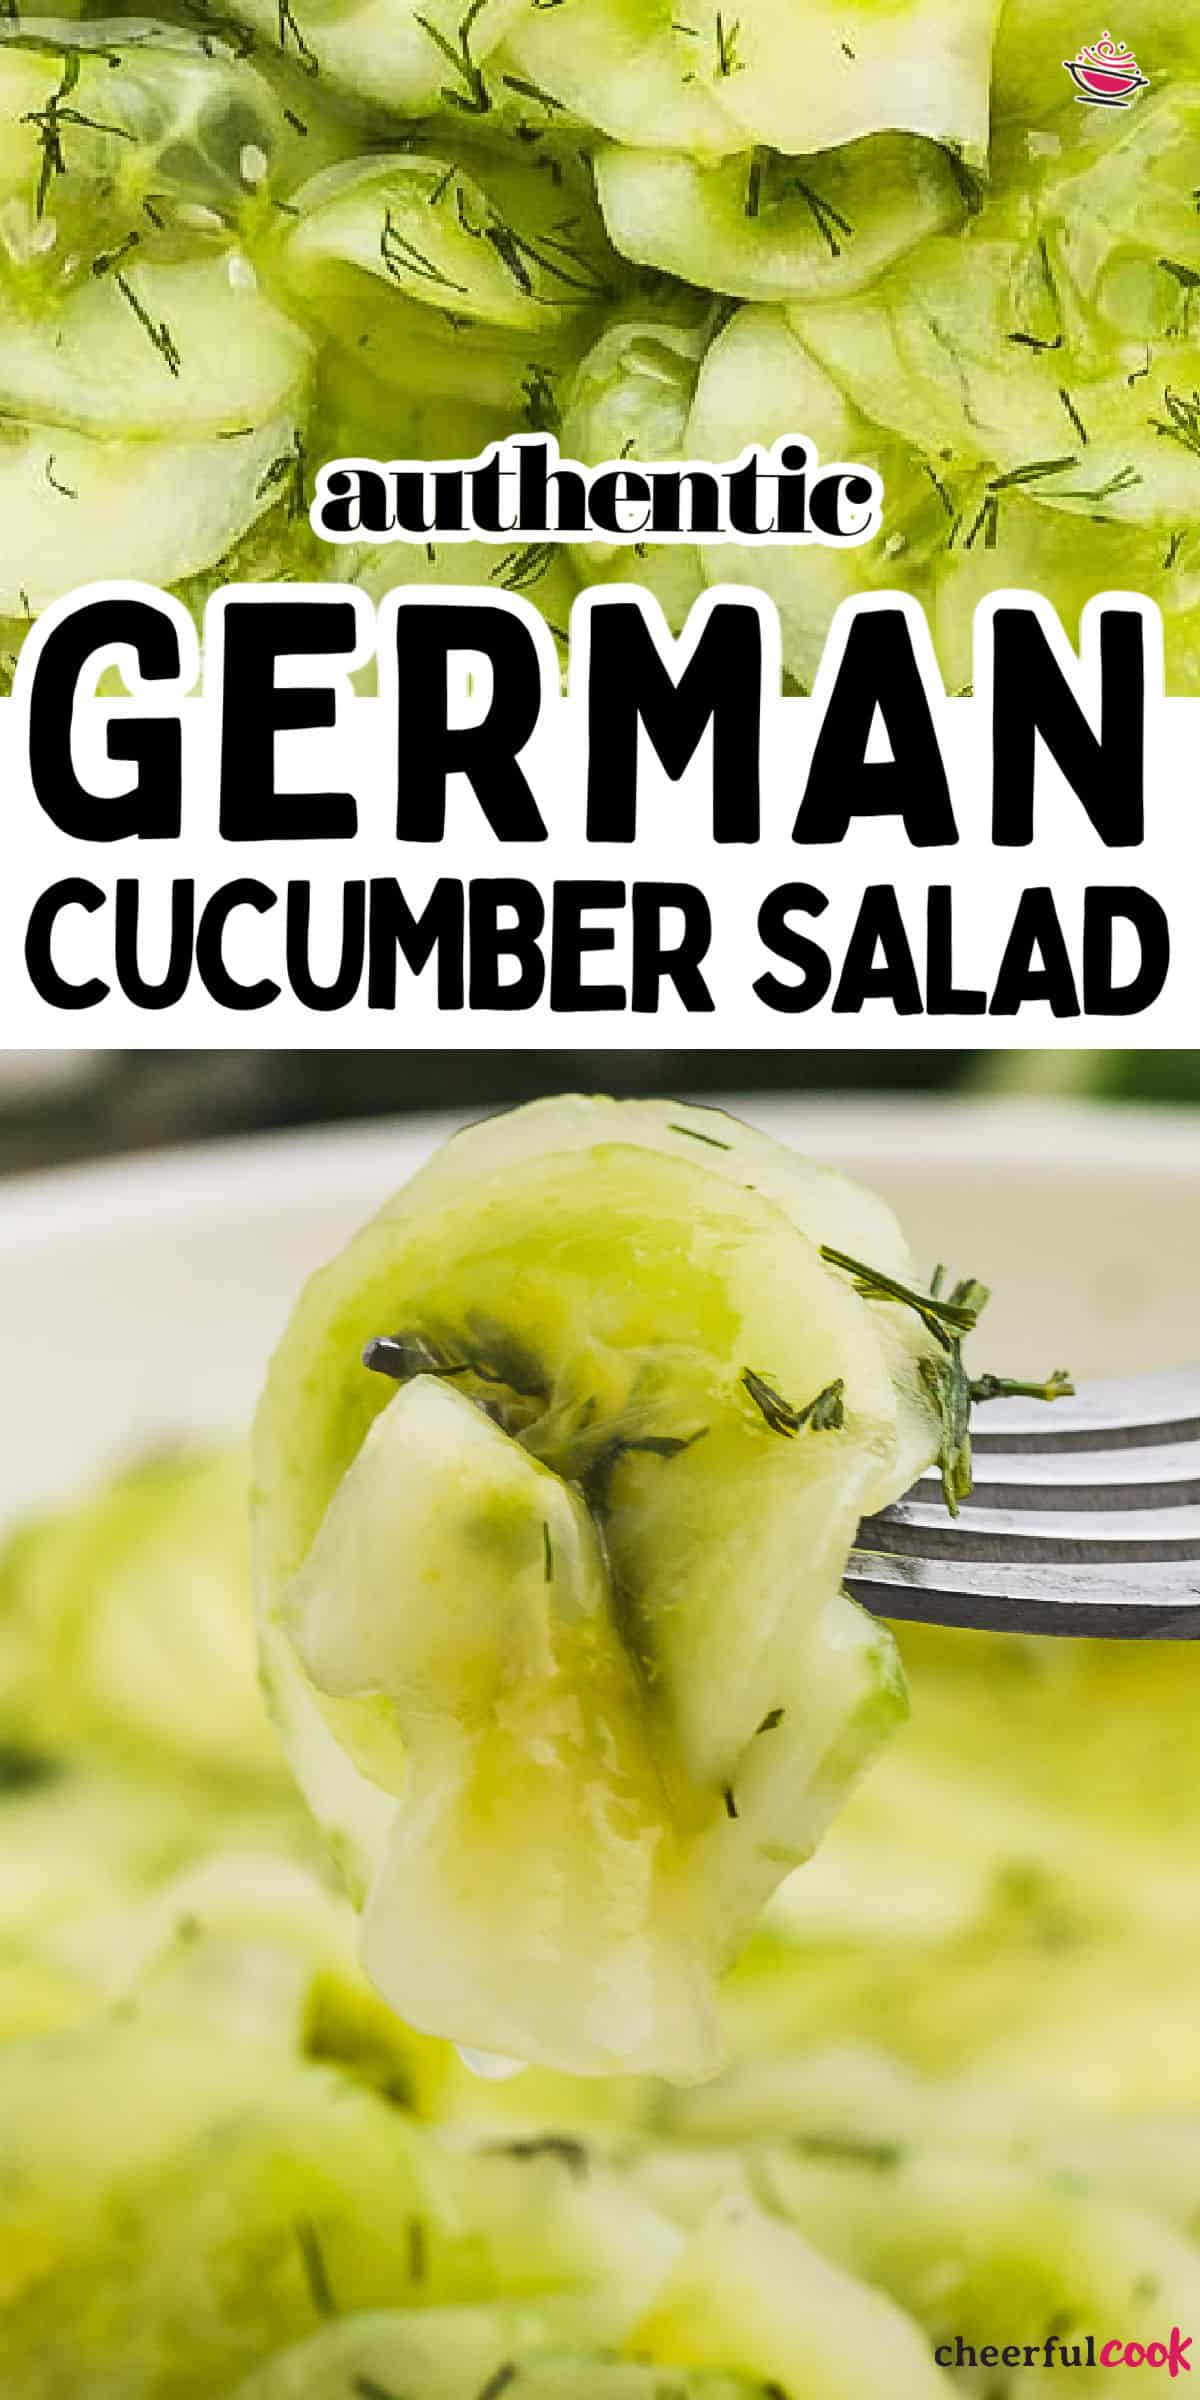 This refreshing German Cucumber Salad recipe. With just a handful of ingredients, it's both light, sweet, tart, and incredibly delicious. #cheerfulcook #cucumber #Oma #German #sidesalad #Germanfood ♡ cheerfulcook.com via @cheerfulcook